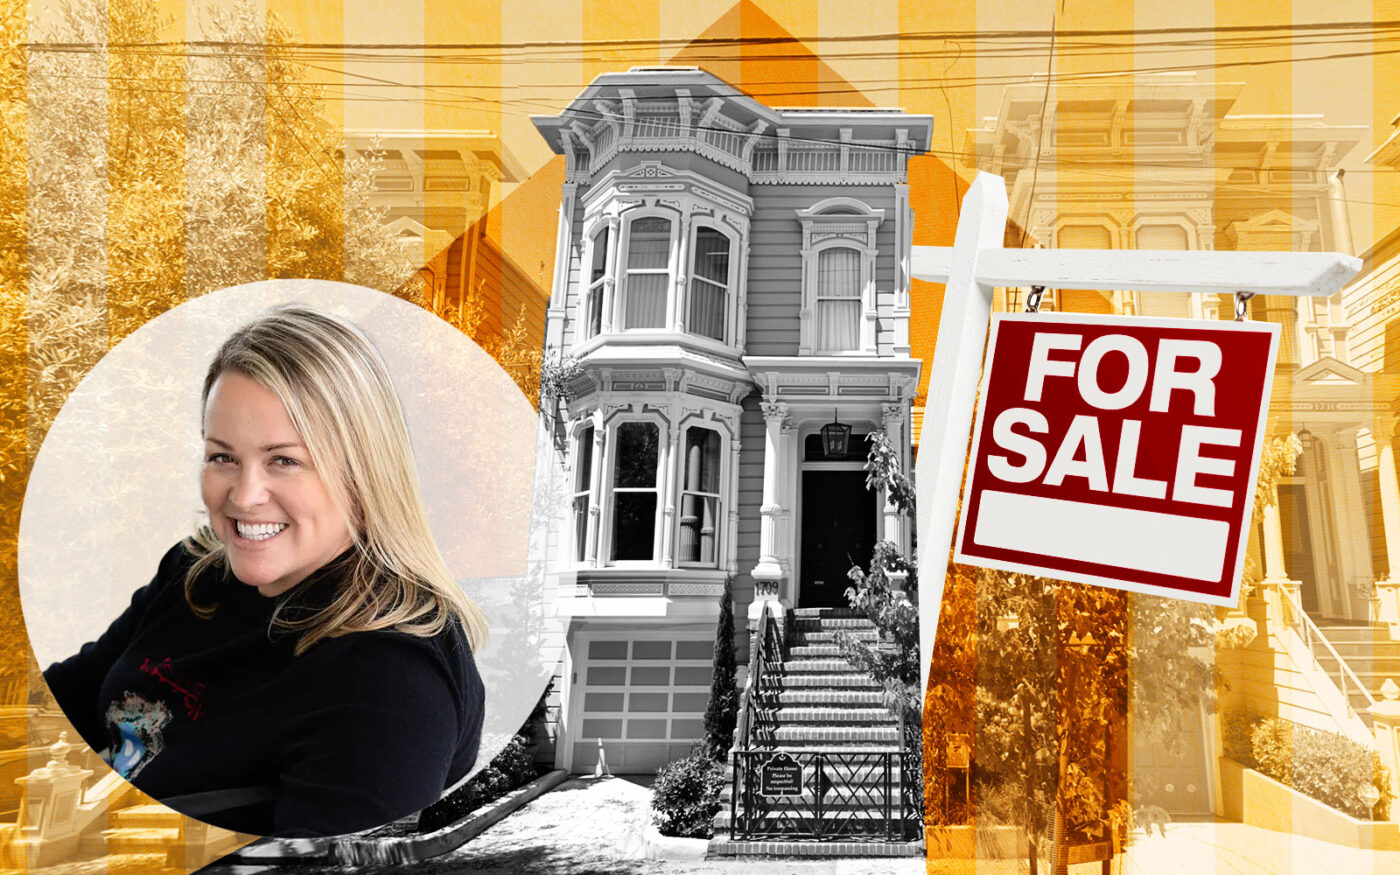 “Full House” Location in San Francisco Lists for $6.5M